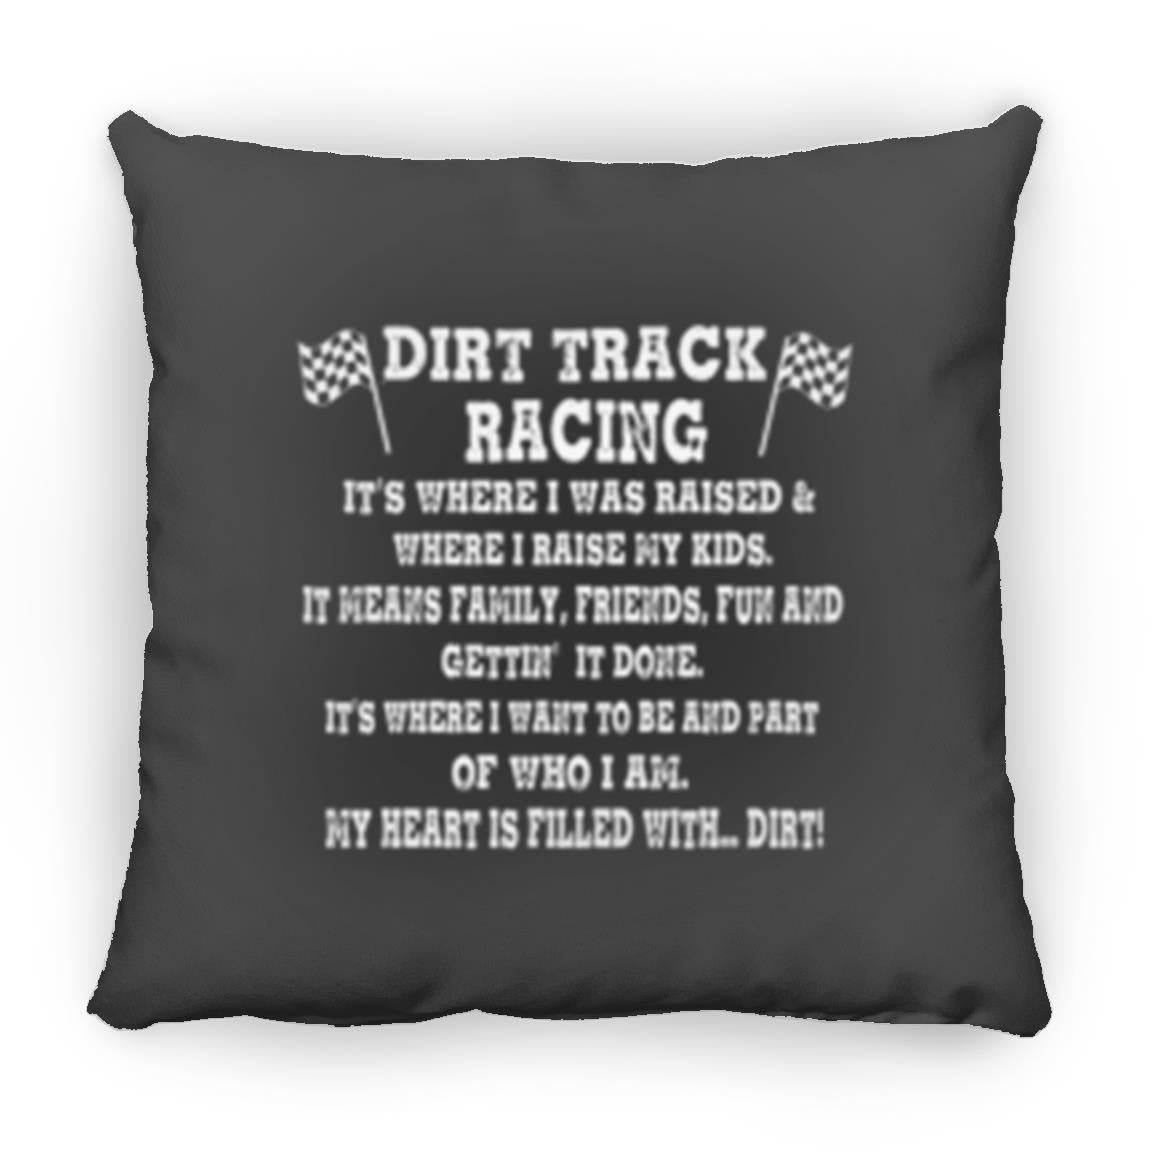 Dirt Track Racing It's Where I Was Raised Small Square Pillow